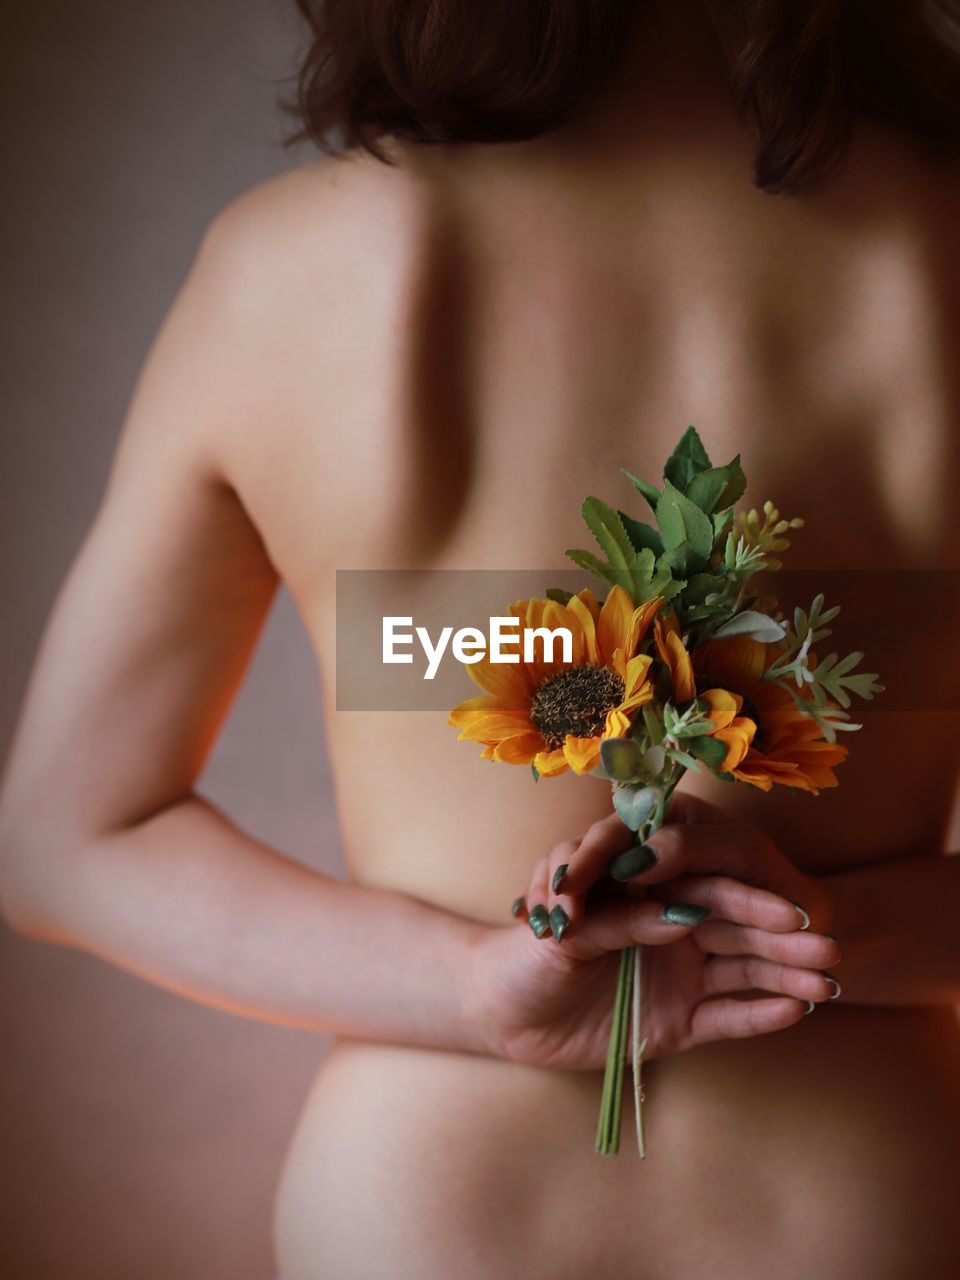 Naked woman holding flowering plant